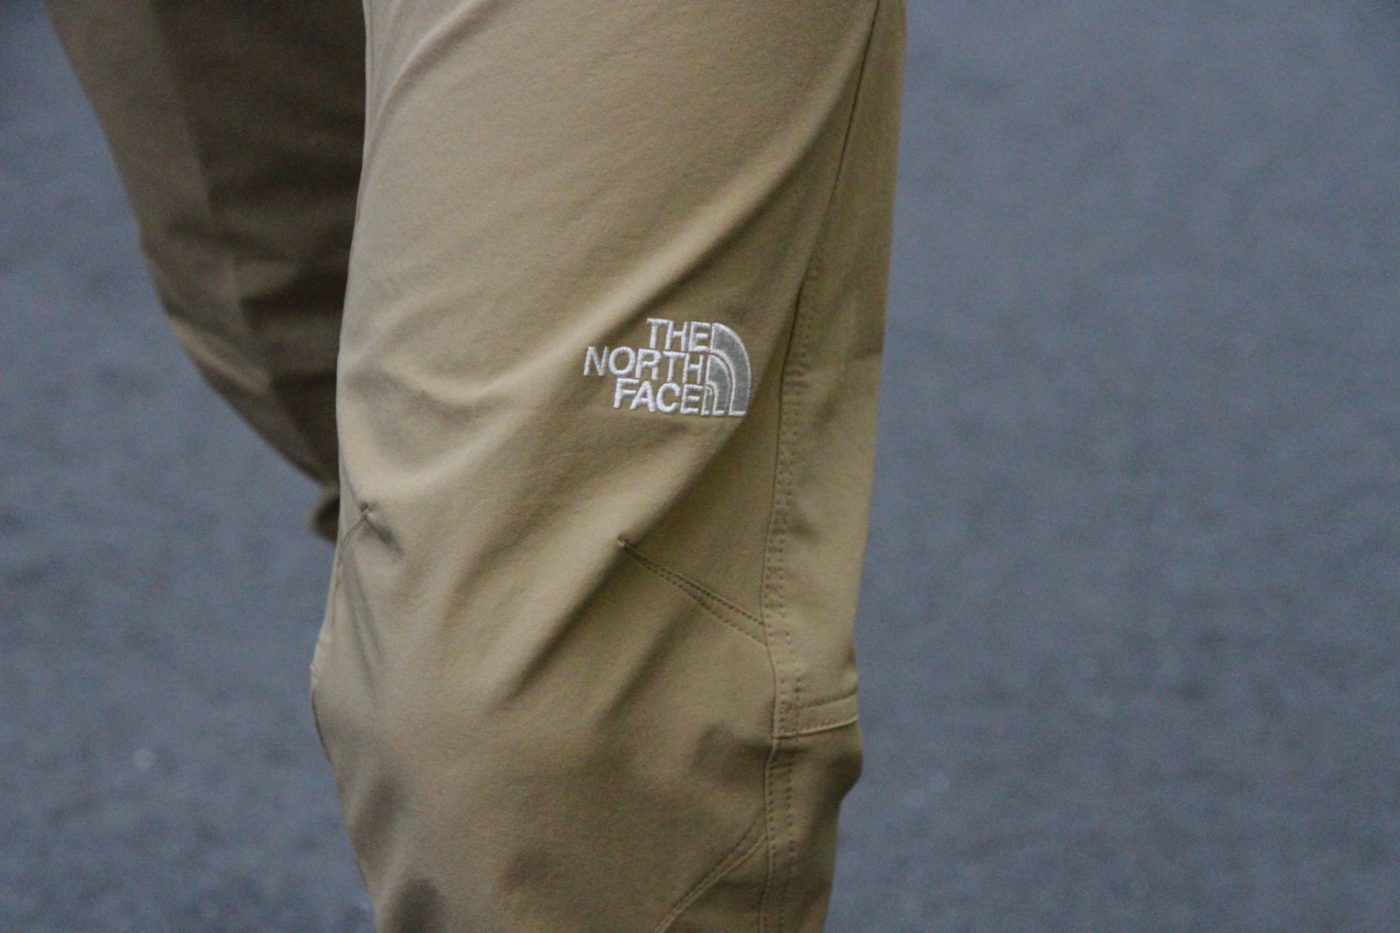 THE NORTH FACE / Doro Light Pant